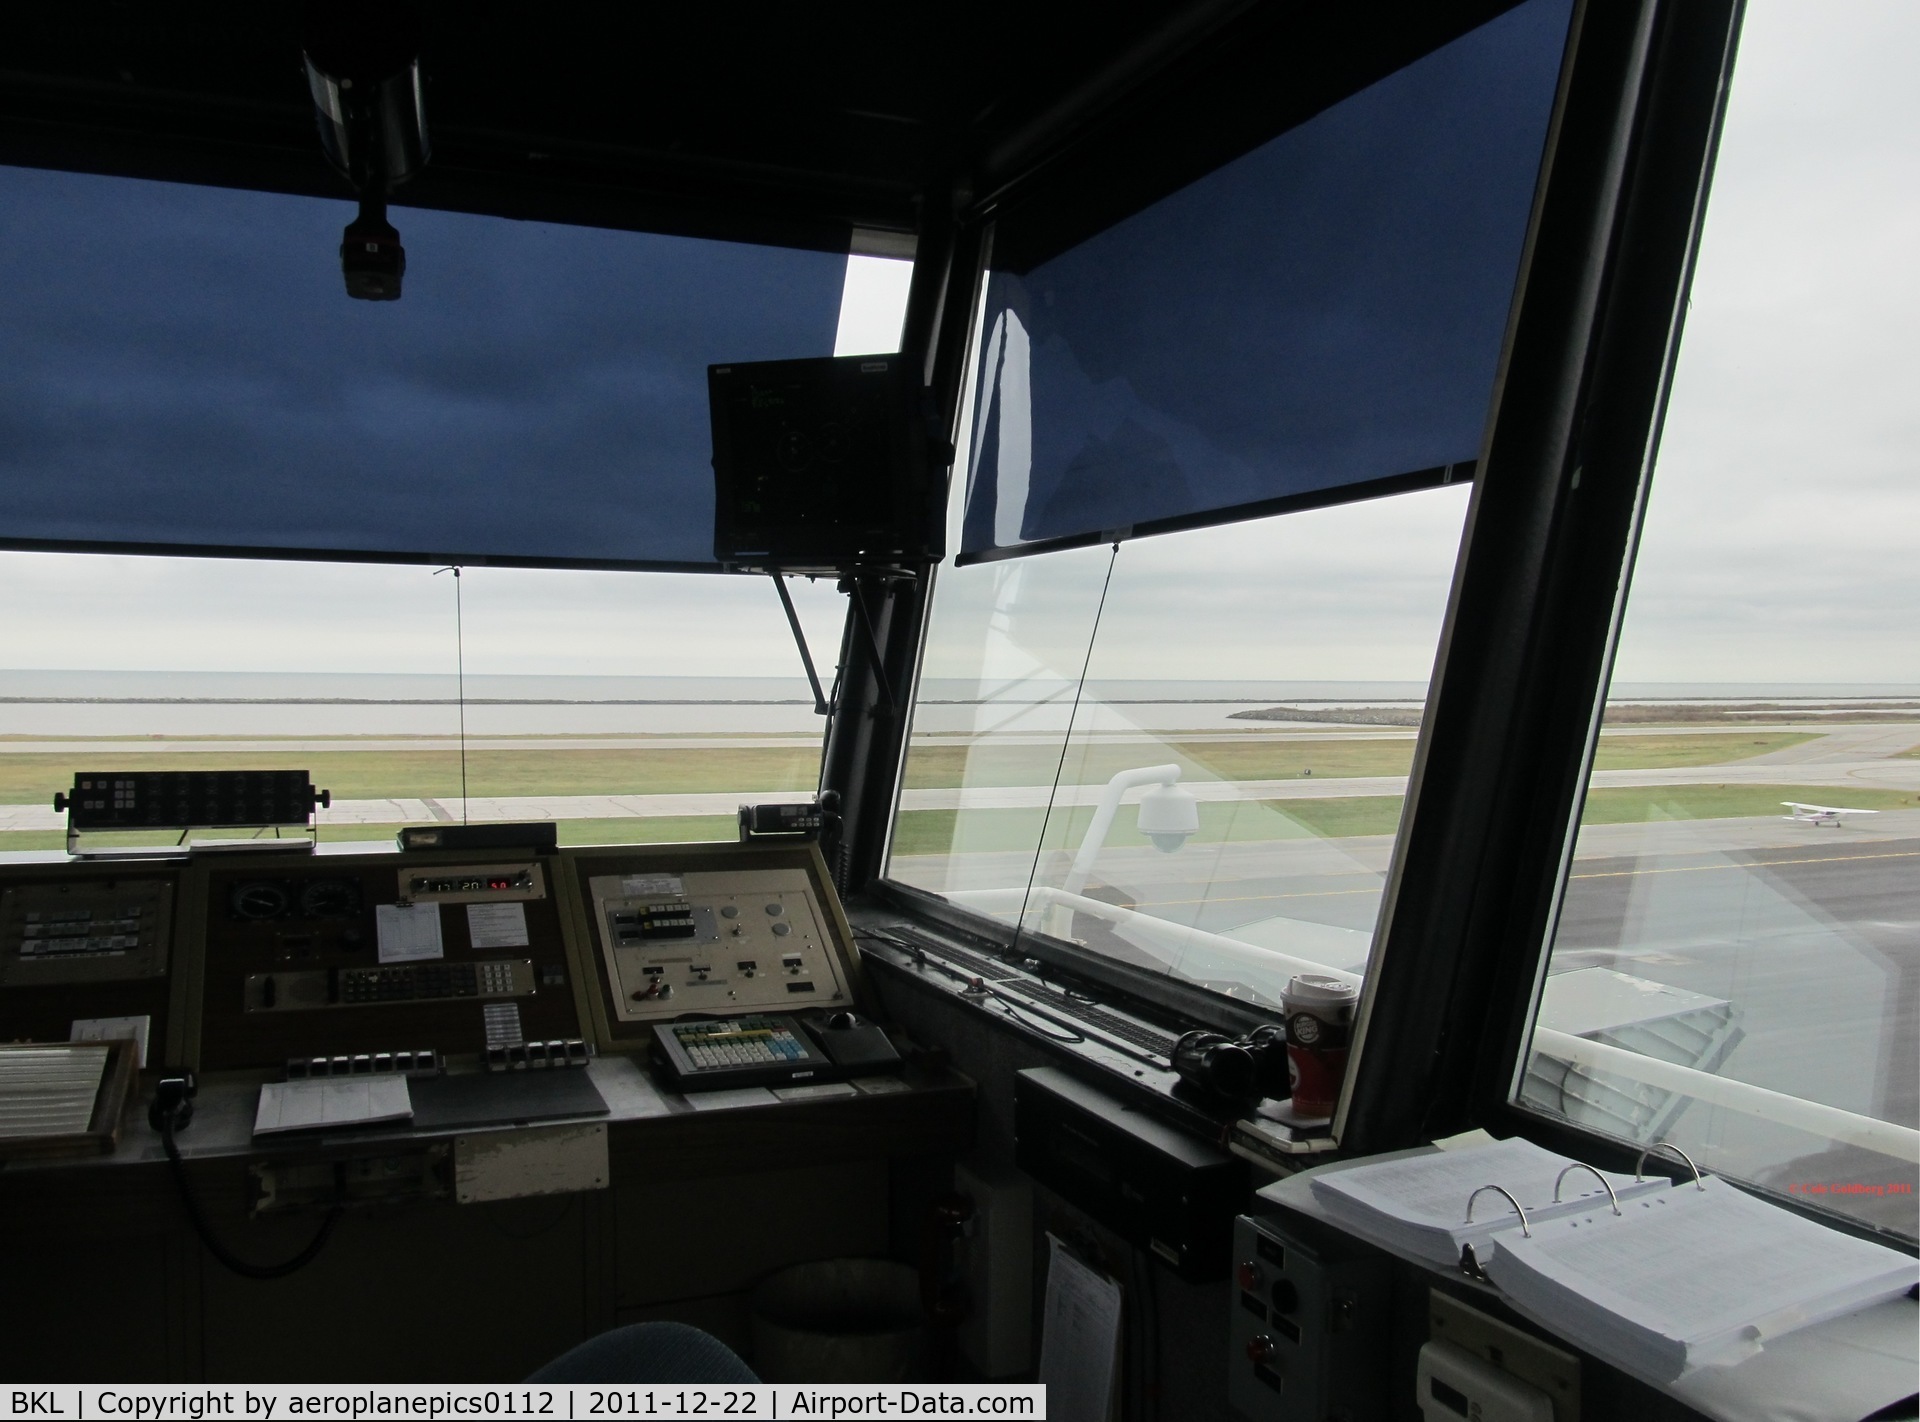 Burke Lakefront Airport (BKL) - A view from inside the Air Traffic Control Tower at Burke. 